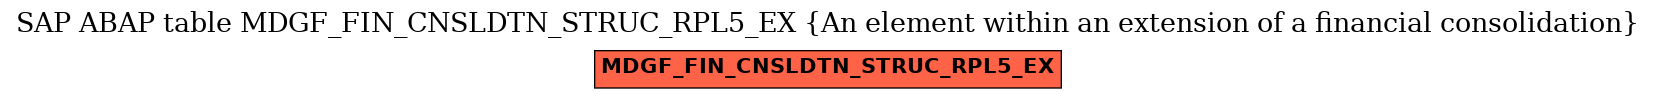 E-R Diagram for table MDGF_FIN_CNSLDTN_STRUC_RPL5_EX (An element within an extension of a financial consolidation)